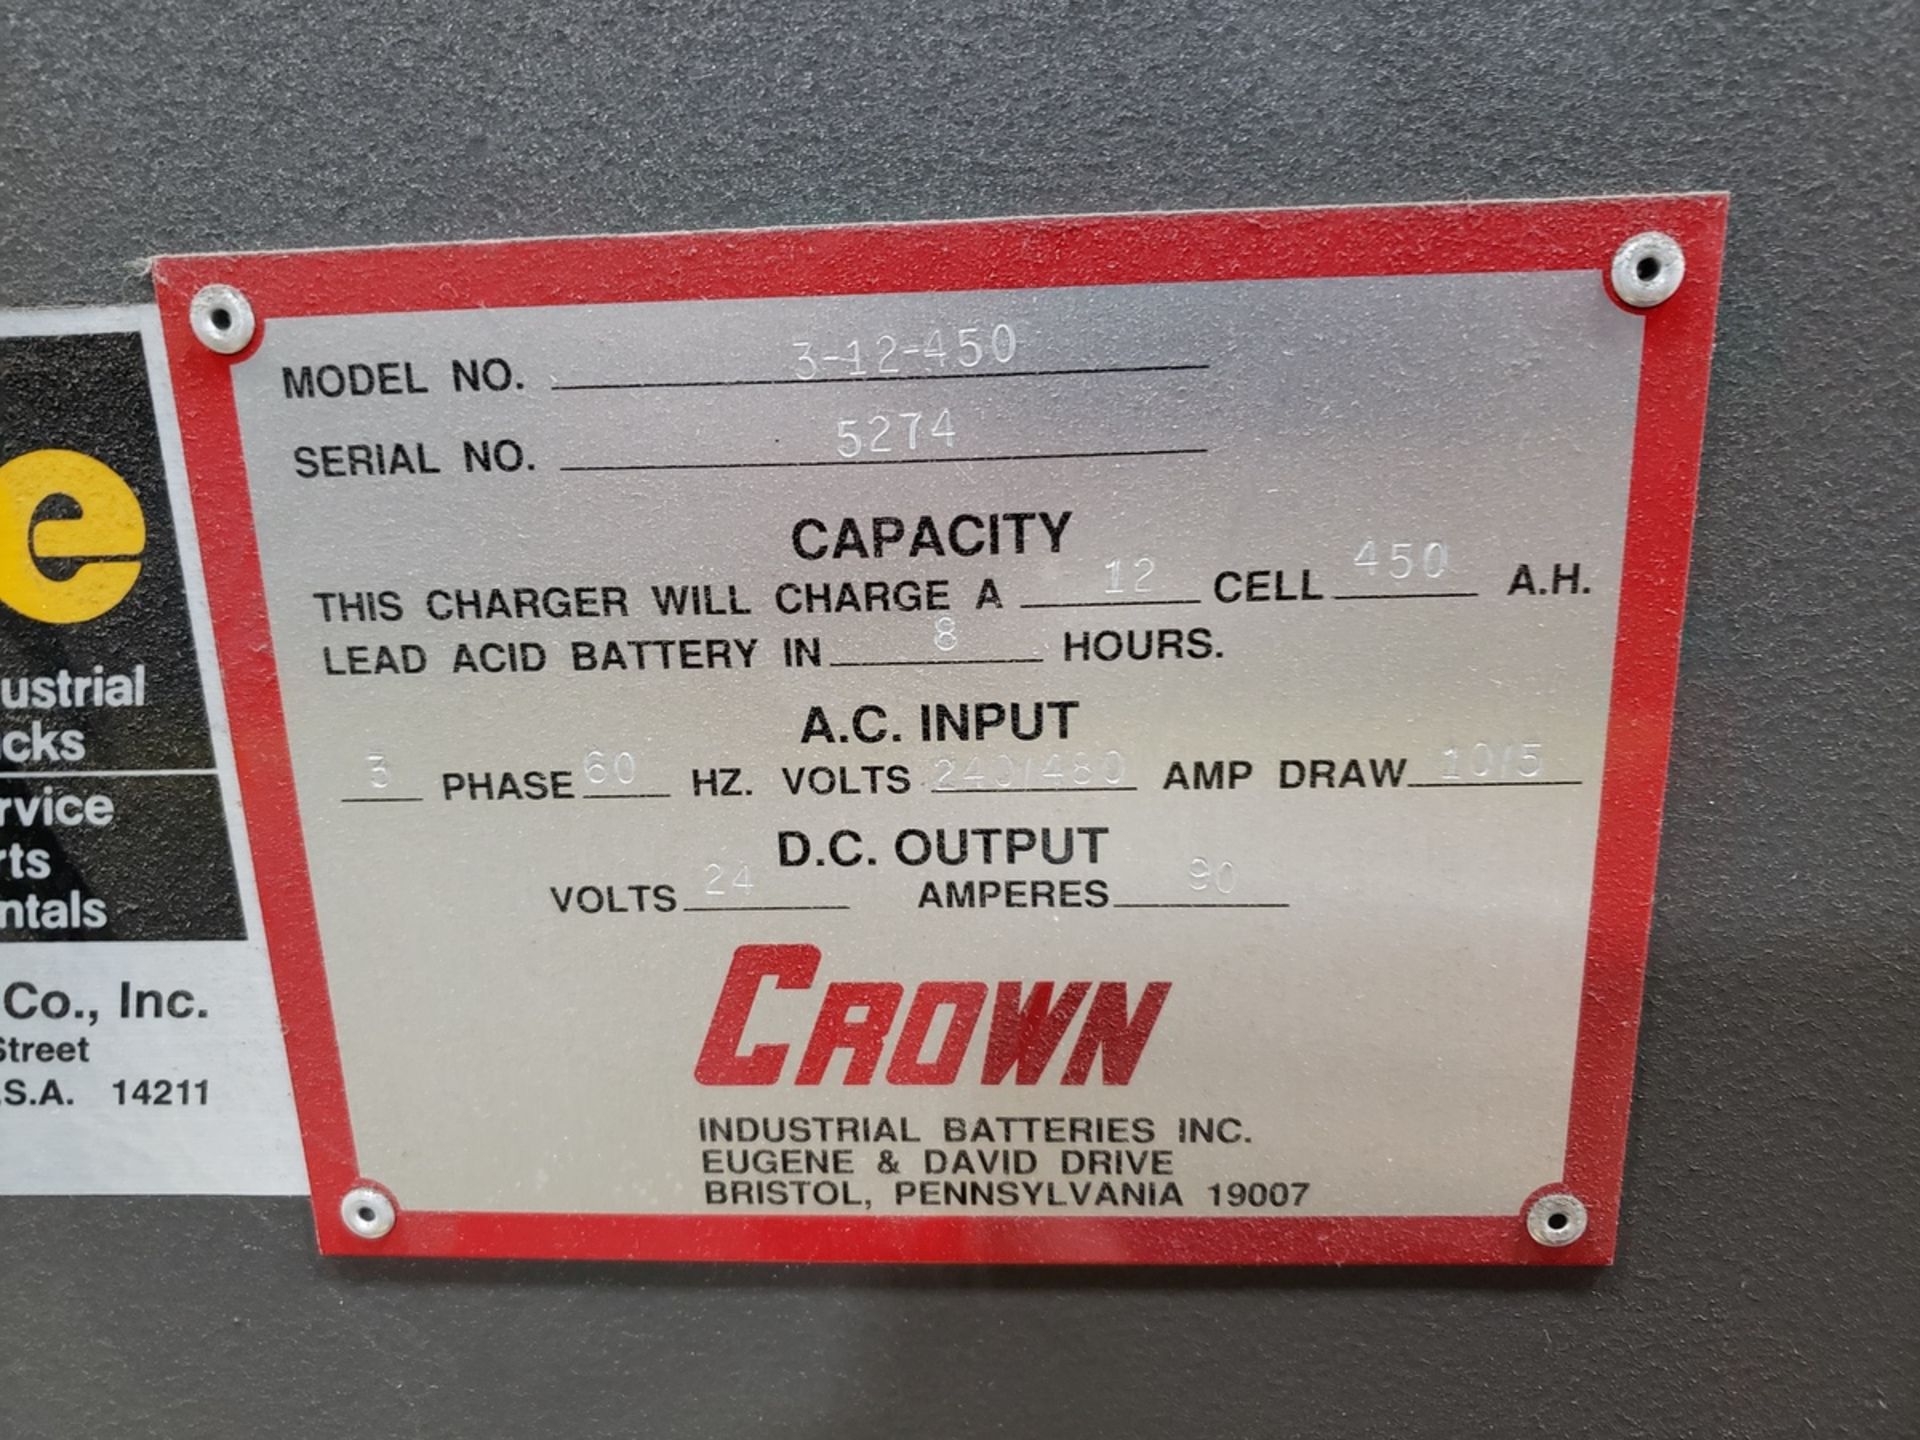 Crown Battery Charger, 24 Volt, M# 3-12-450, S/N 5274 | Rig Fee: $100 - Image 2 of 2